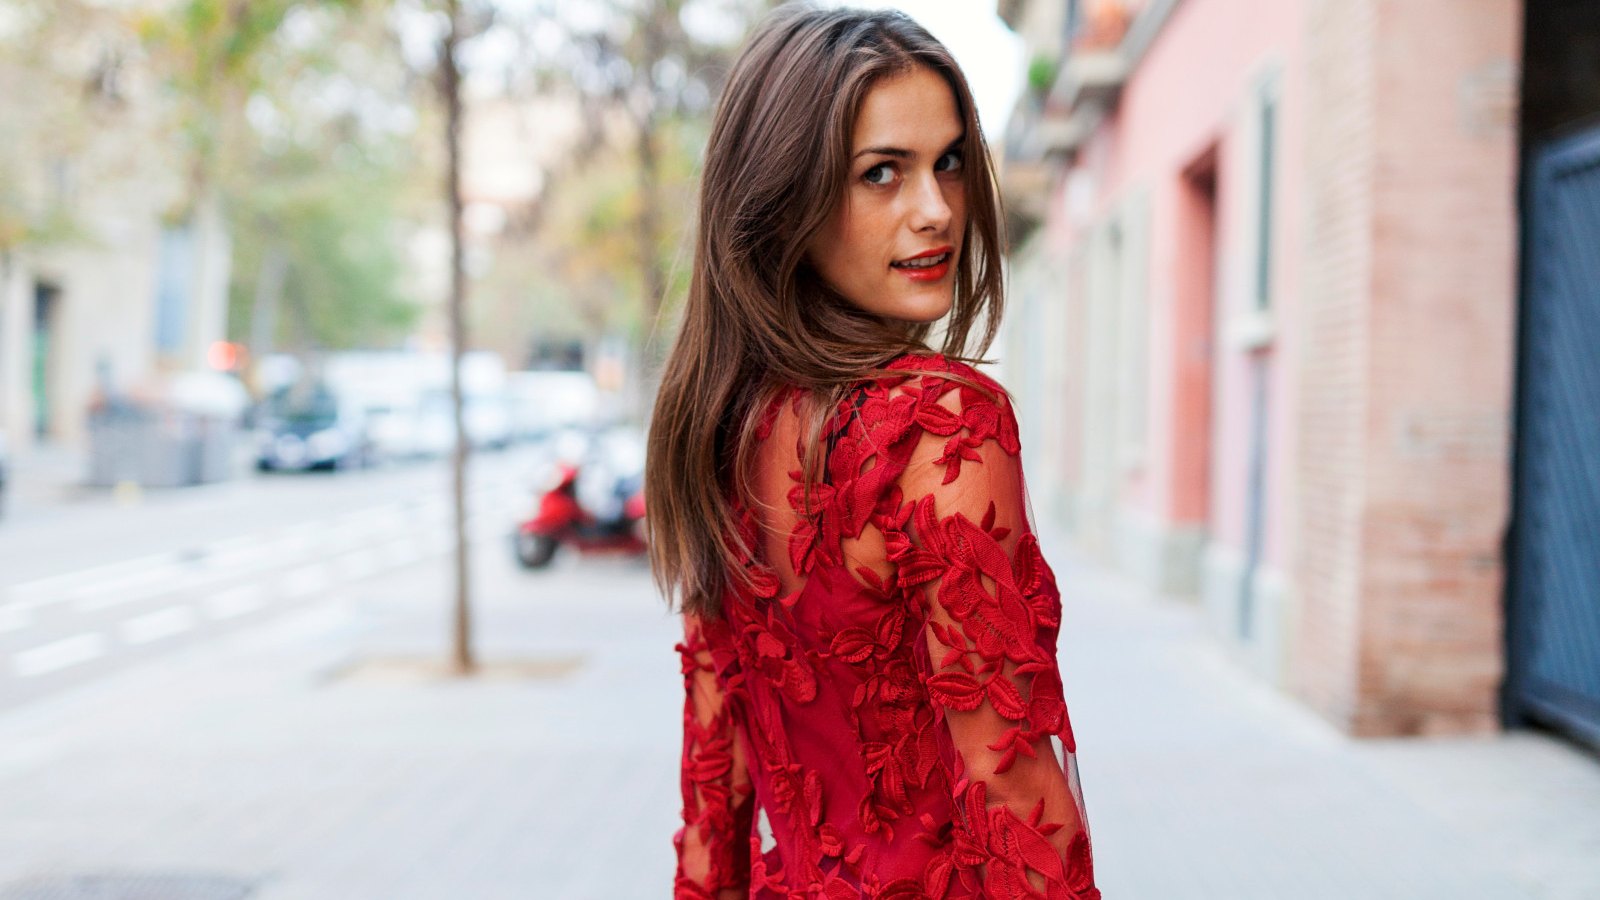 woman in red lace dress